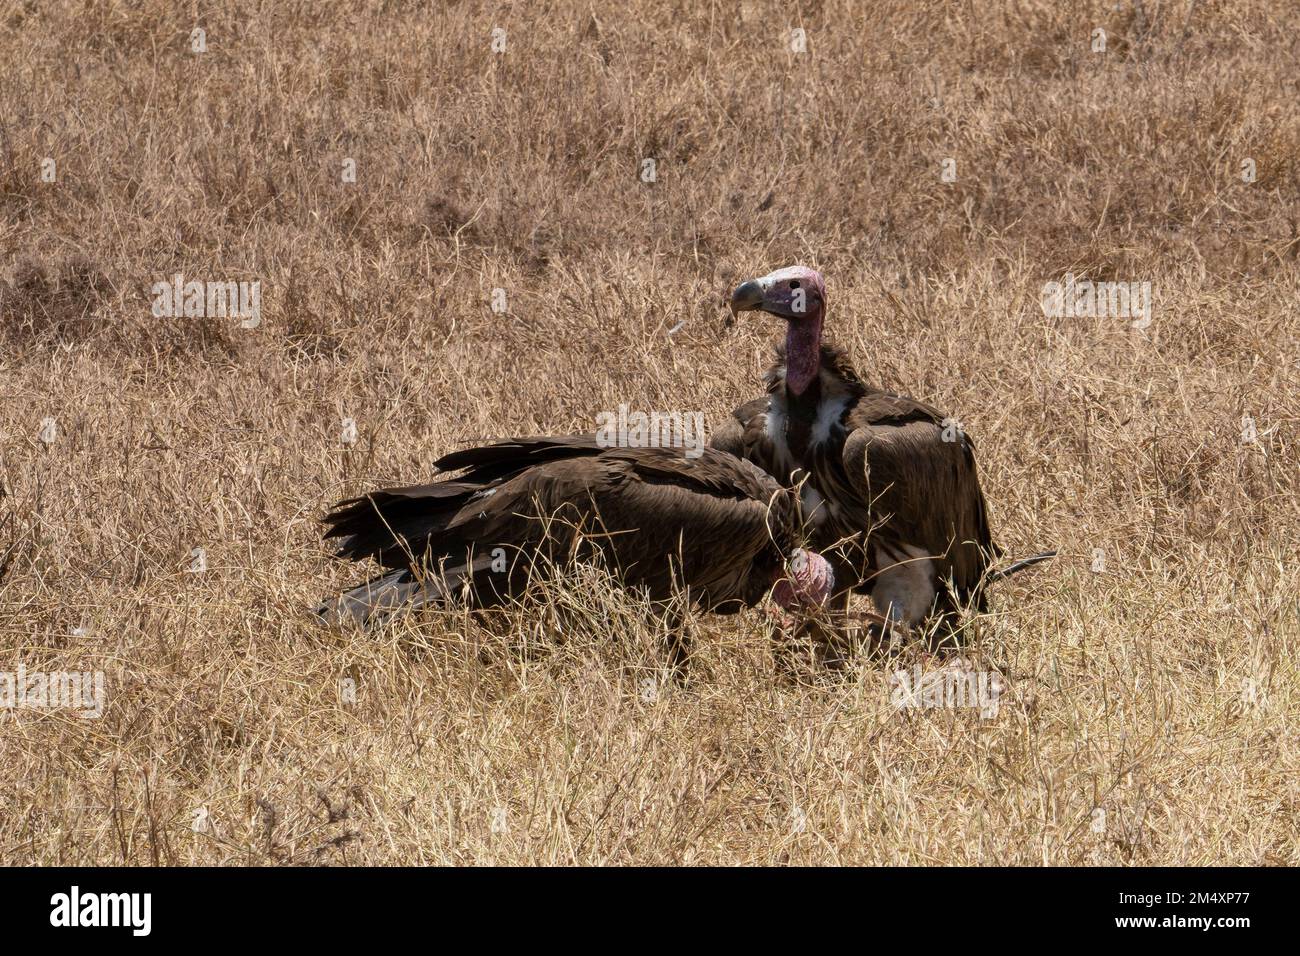 A couple of nubian vultures eating the remains of a carcass in a dry grass field in tanzania. Stock Photo